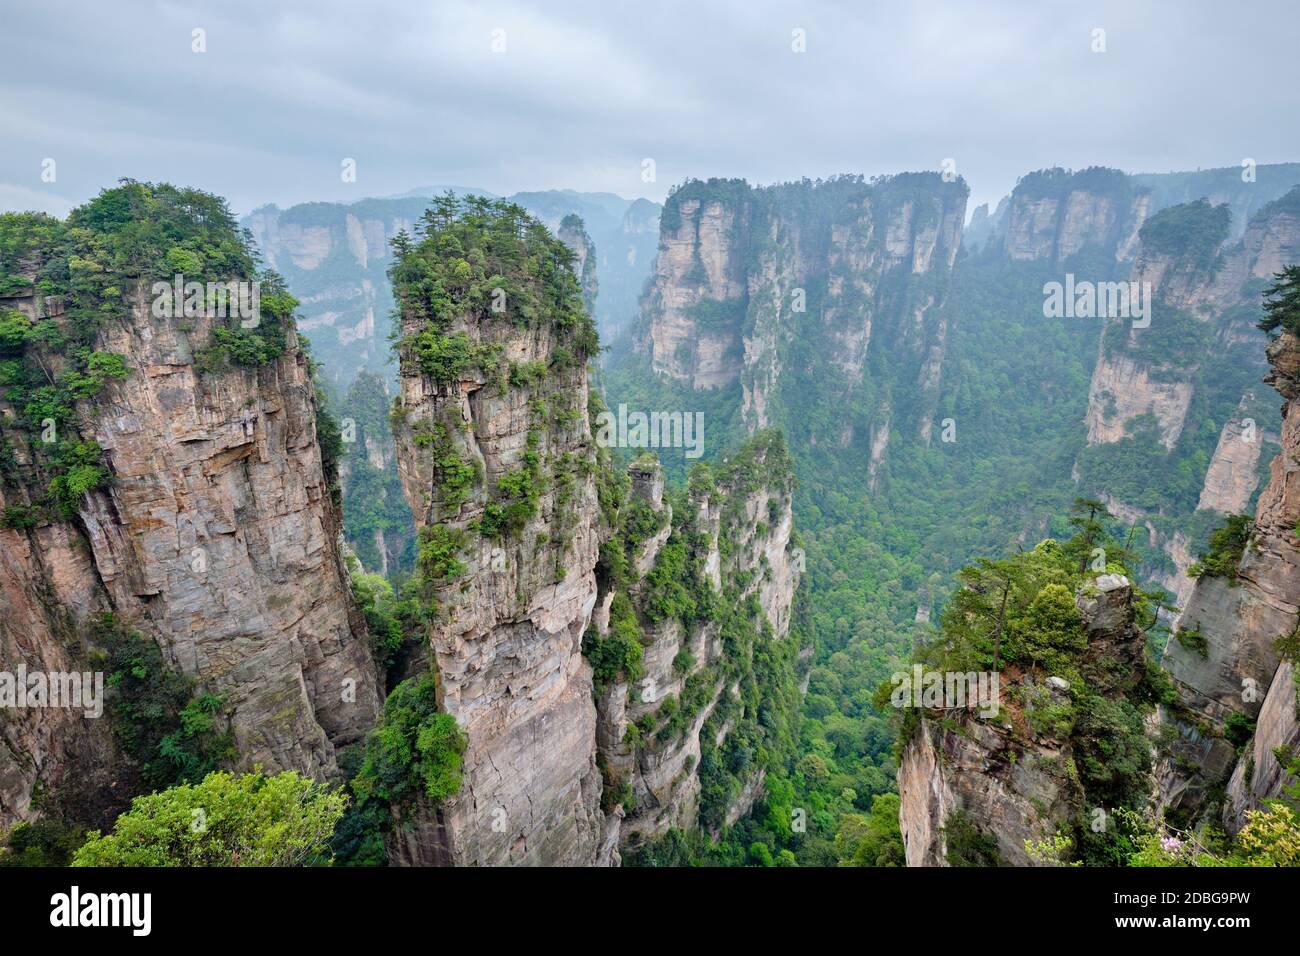 Cultural Tourism Wusong Mountain Scenery Strange Stone Zhangjiajie  Wulingyuan Avatar Film Background The Film Decorative Pattern Cinema  Background Image And Wallpaper for Free Download